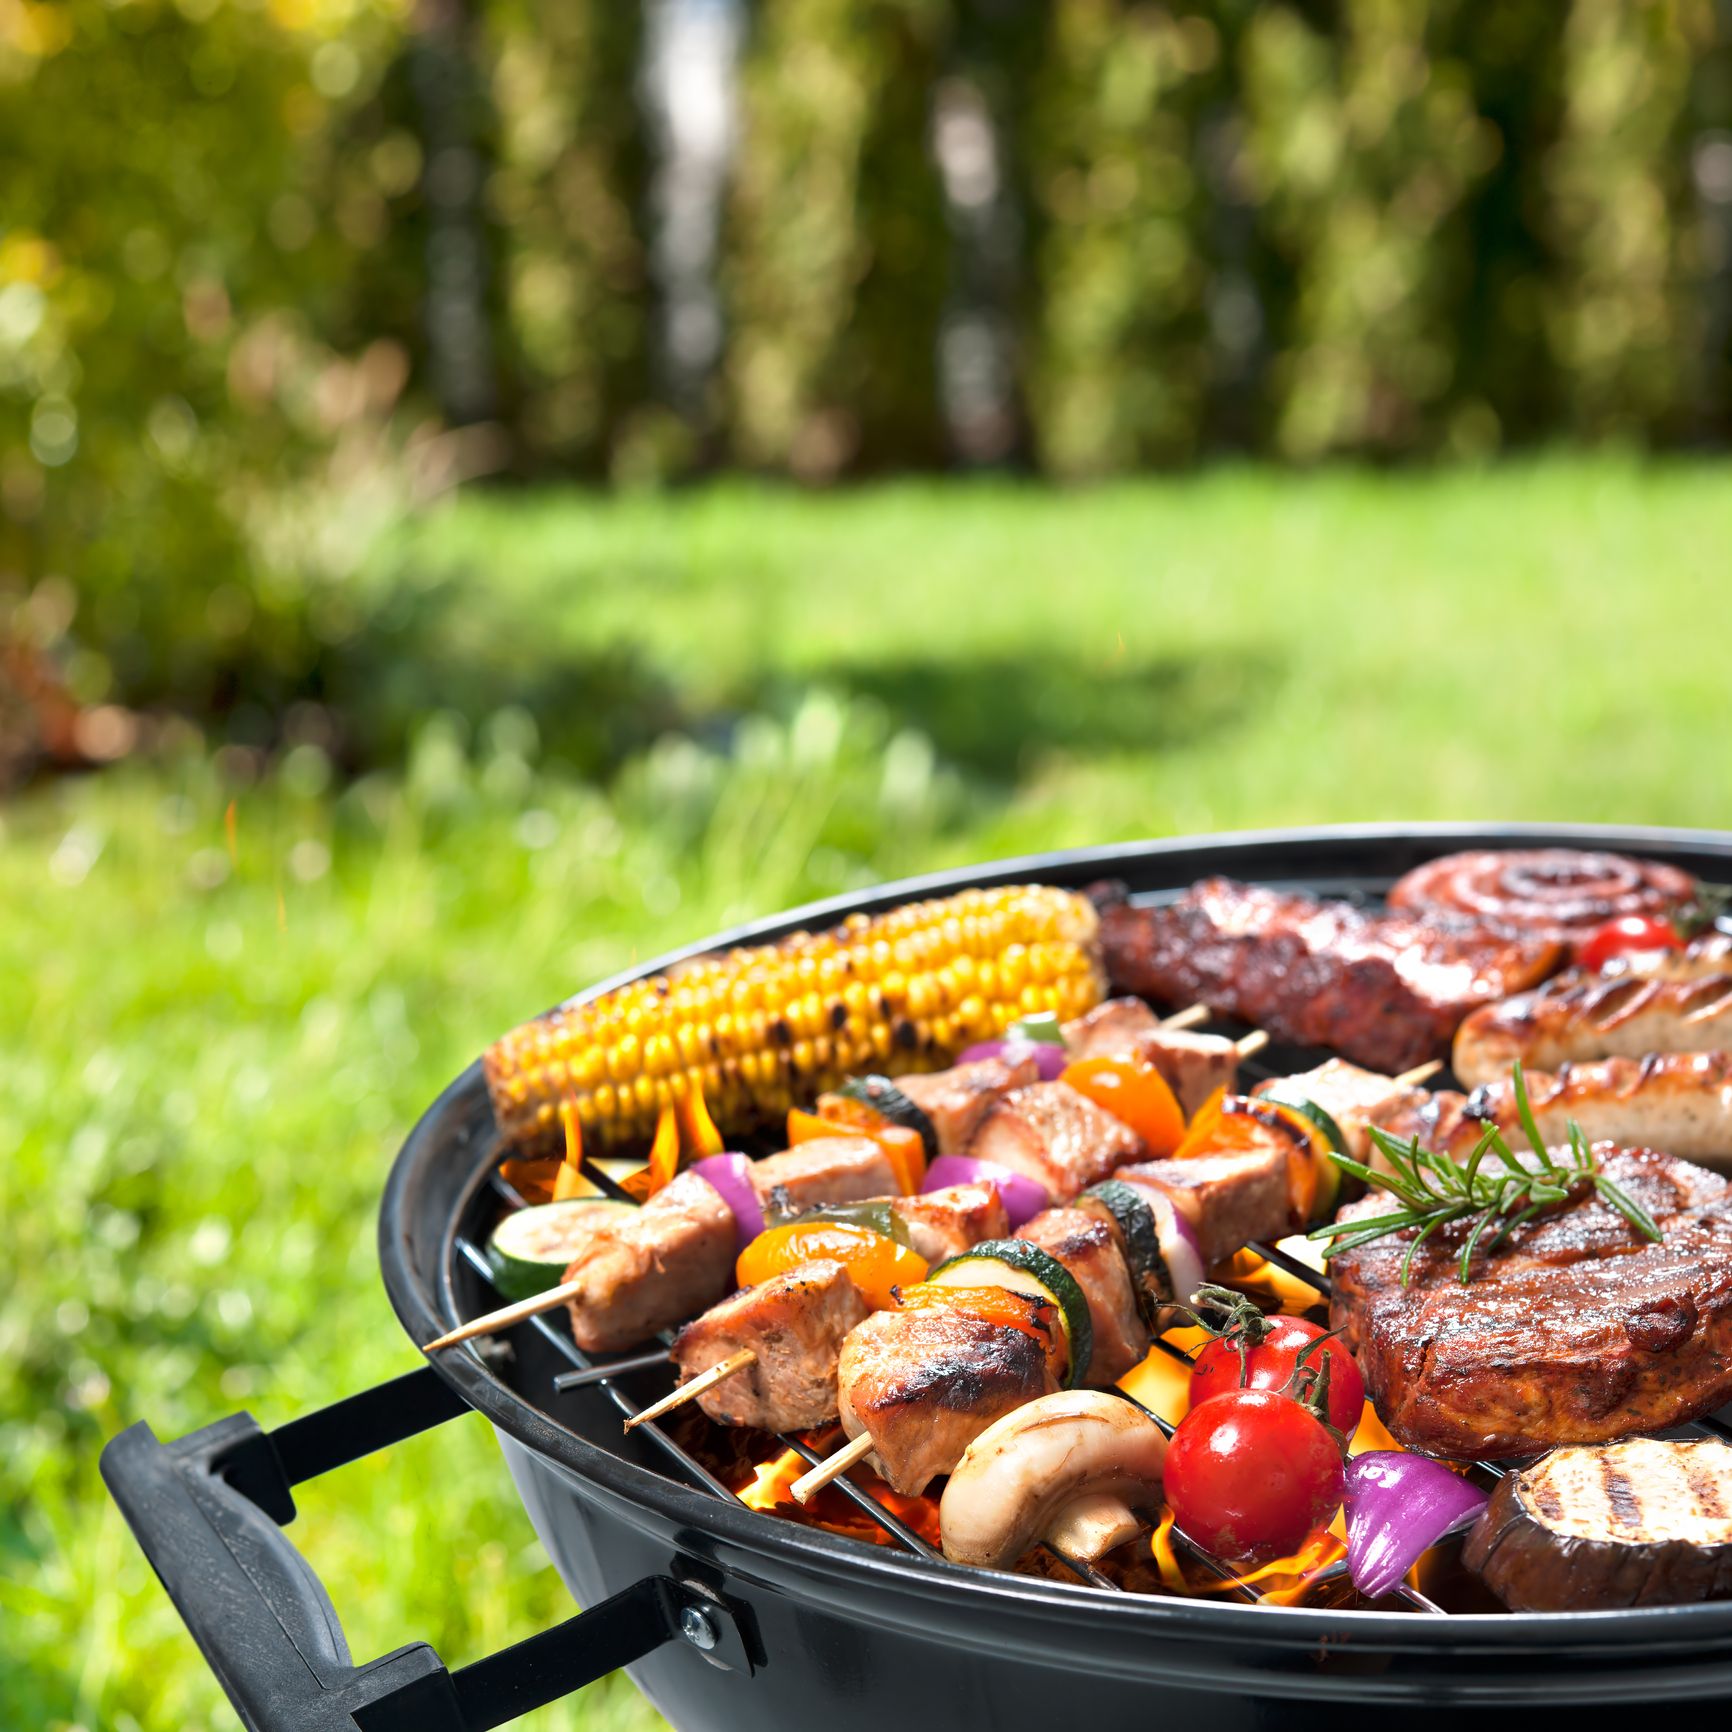 The 5 Best Grill Baskets in 2023